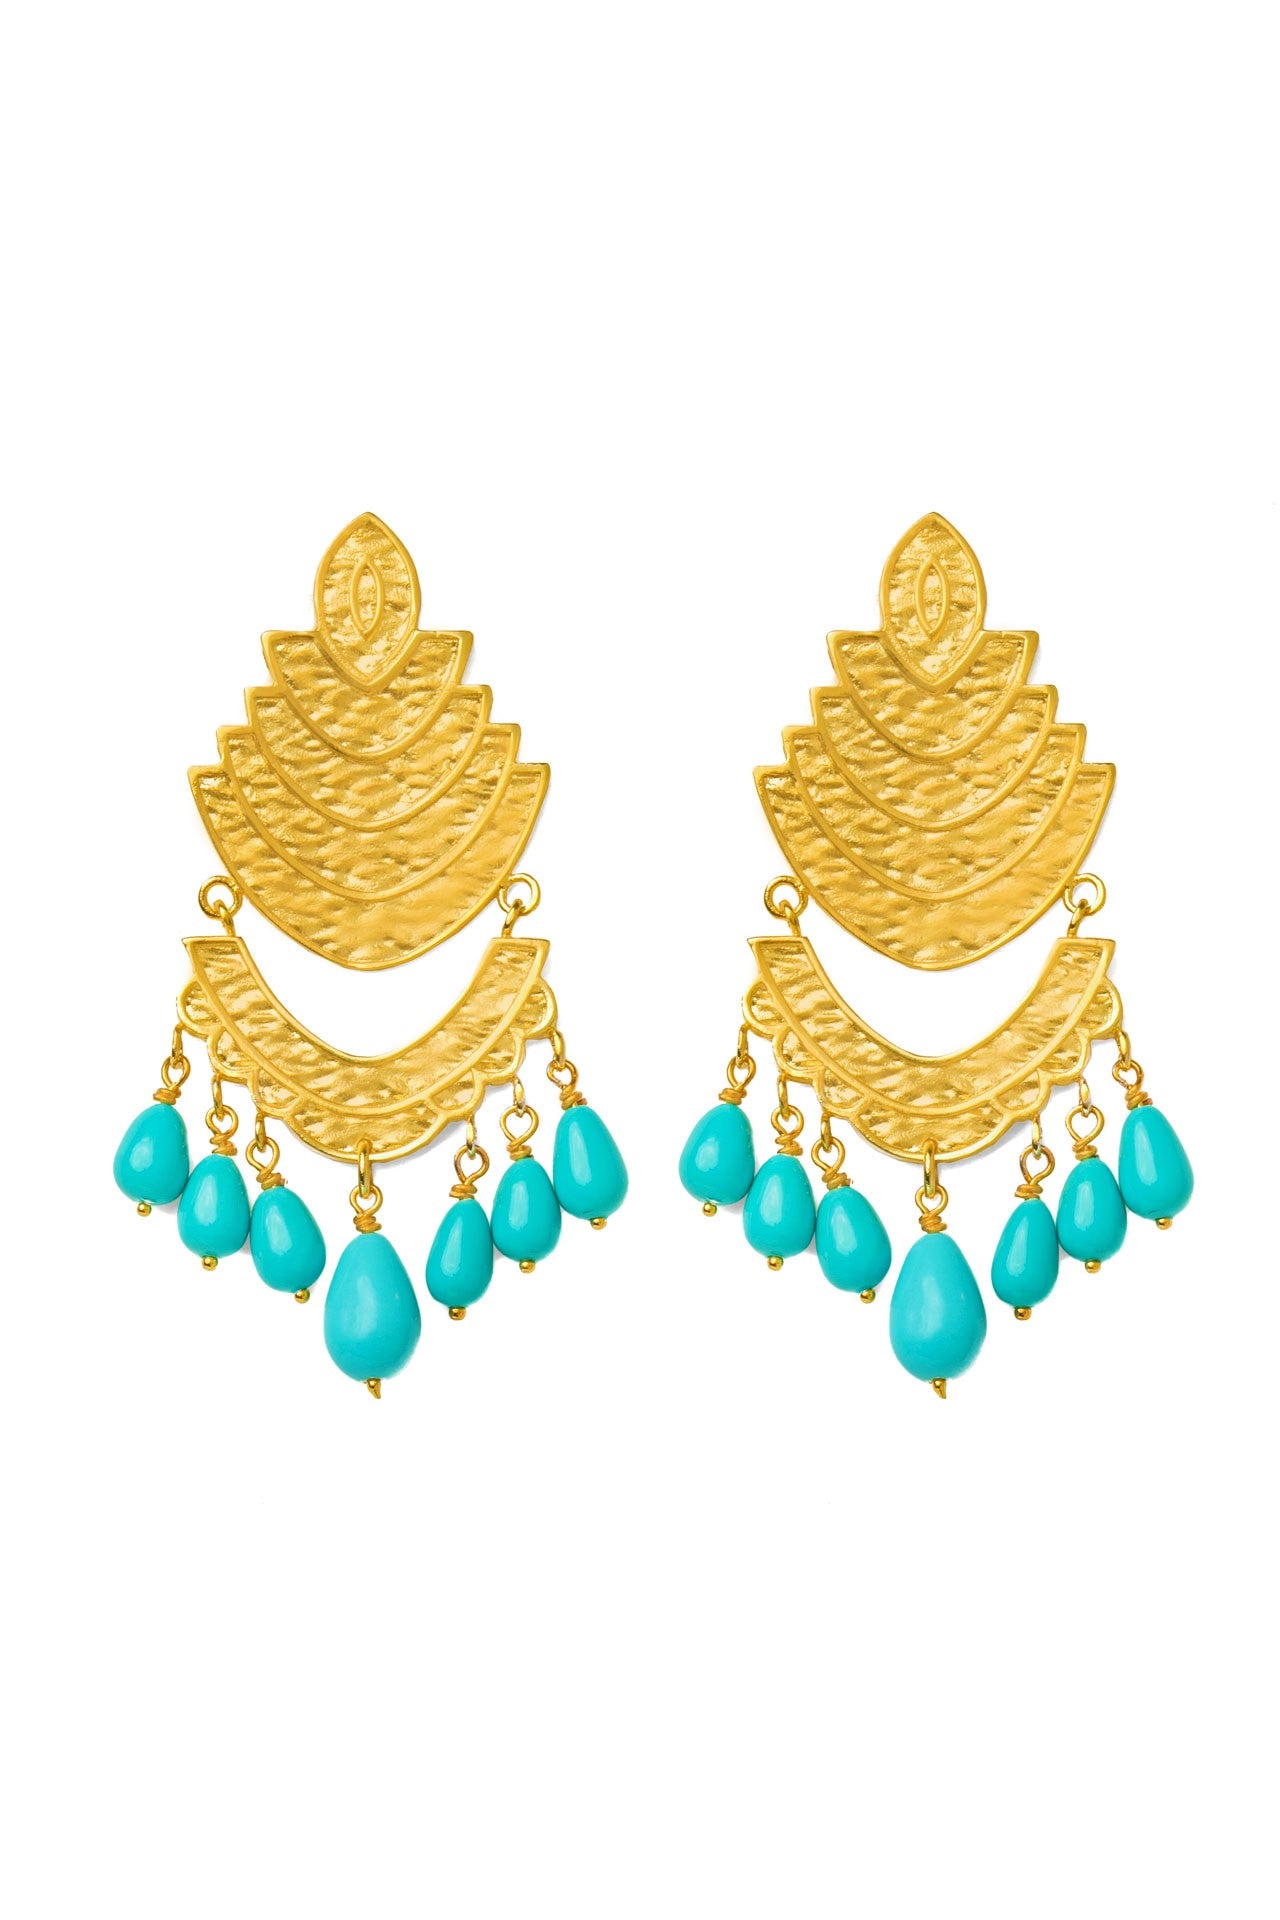 Christy turquoise earrings by Pearl Martini